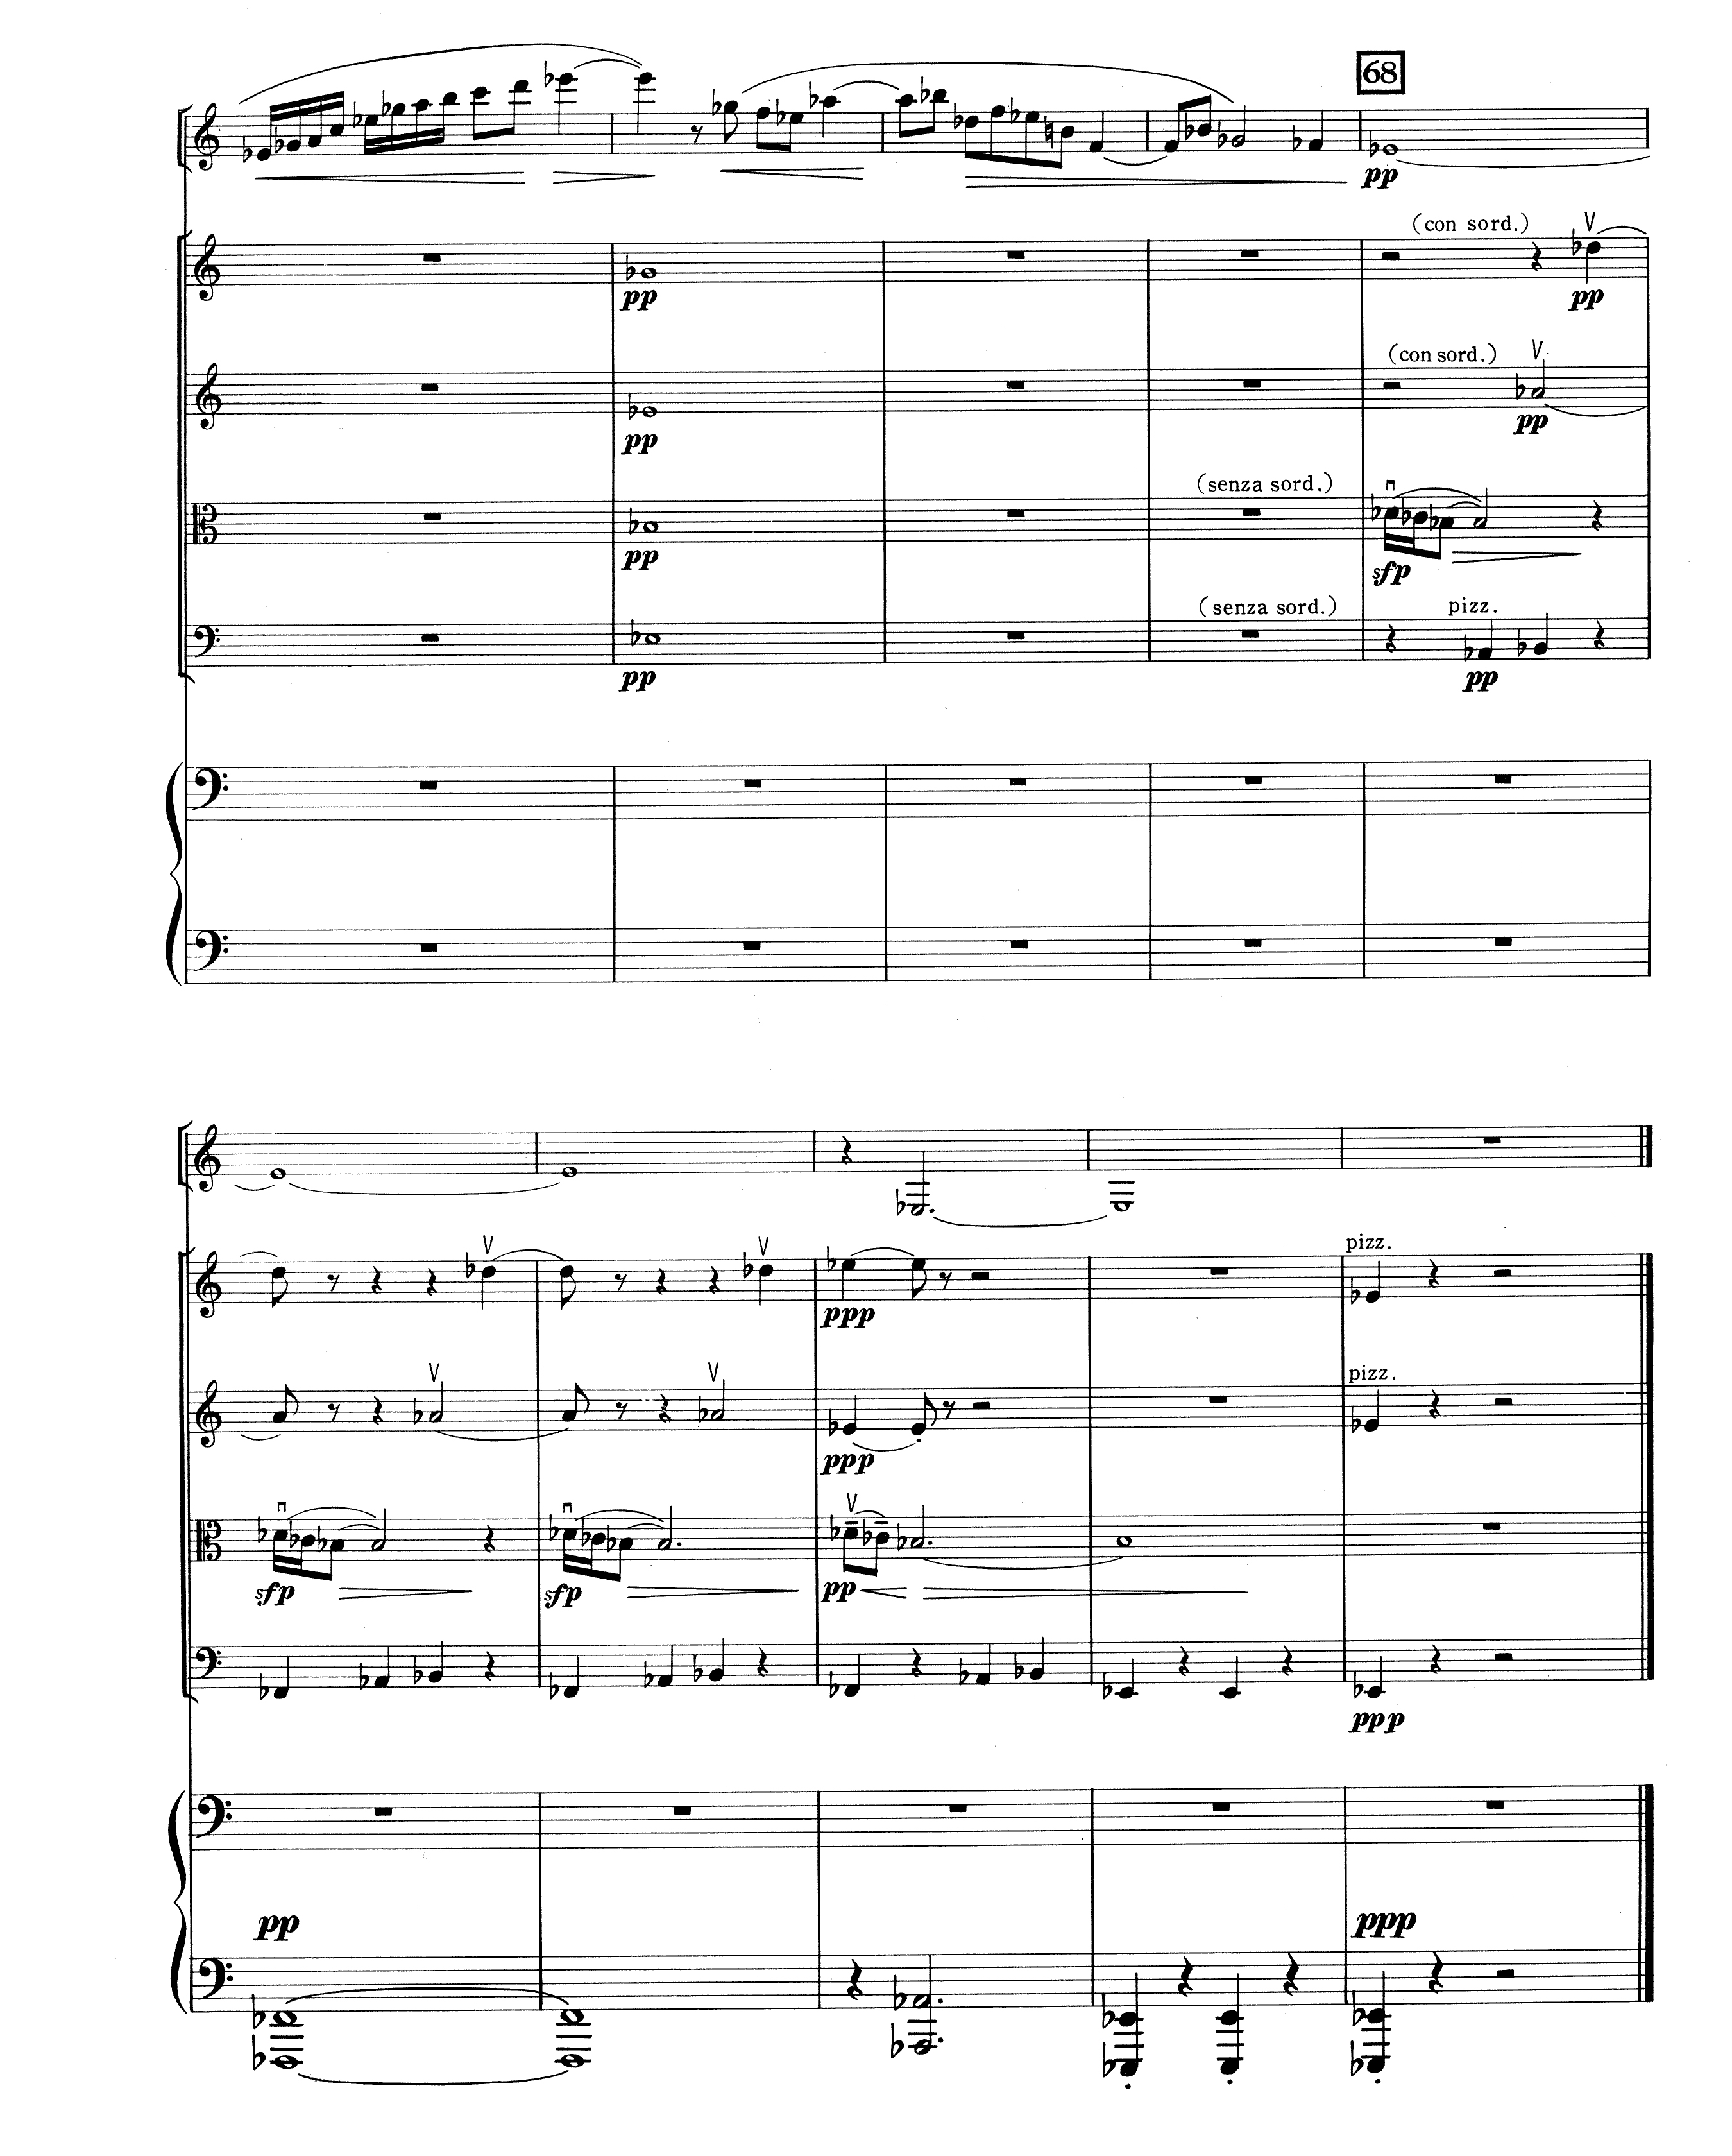 The last page of the score of Orrego-Salas's Sextet